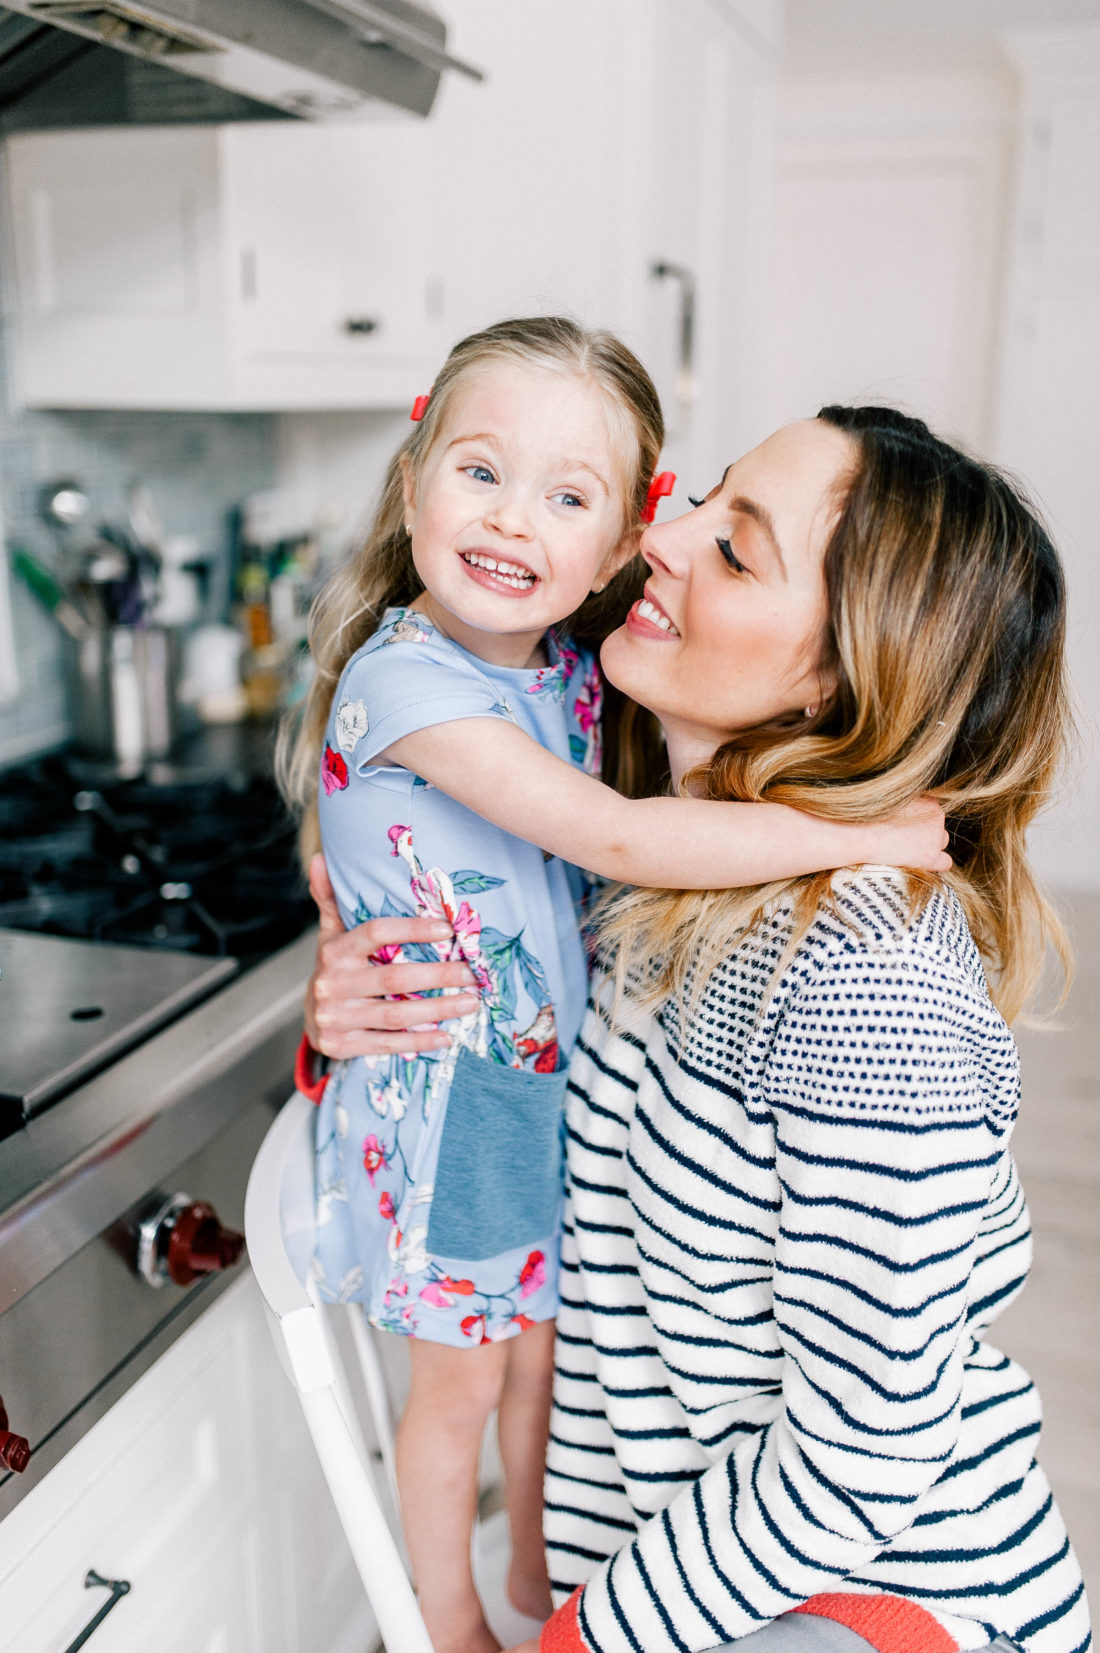 Marlowe Martino laughs and hugs mom Eva Amurri Martino while cooking in the kitchen of their Connecitcut home